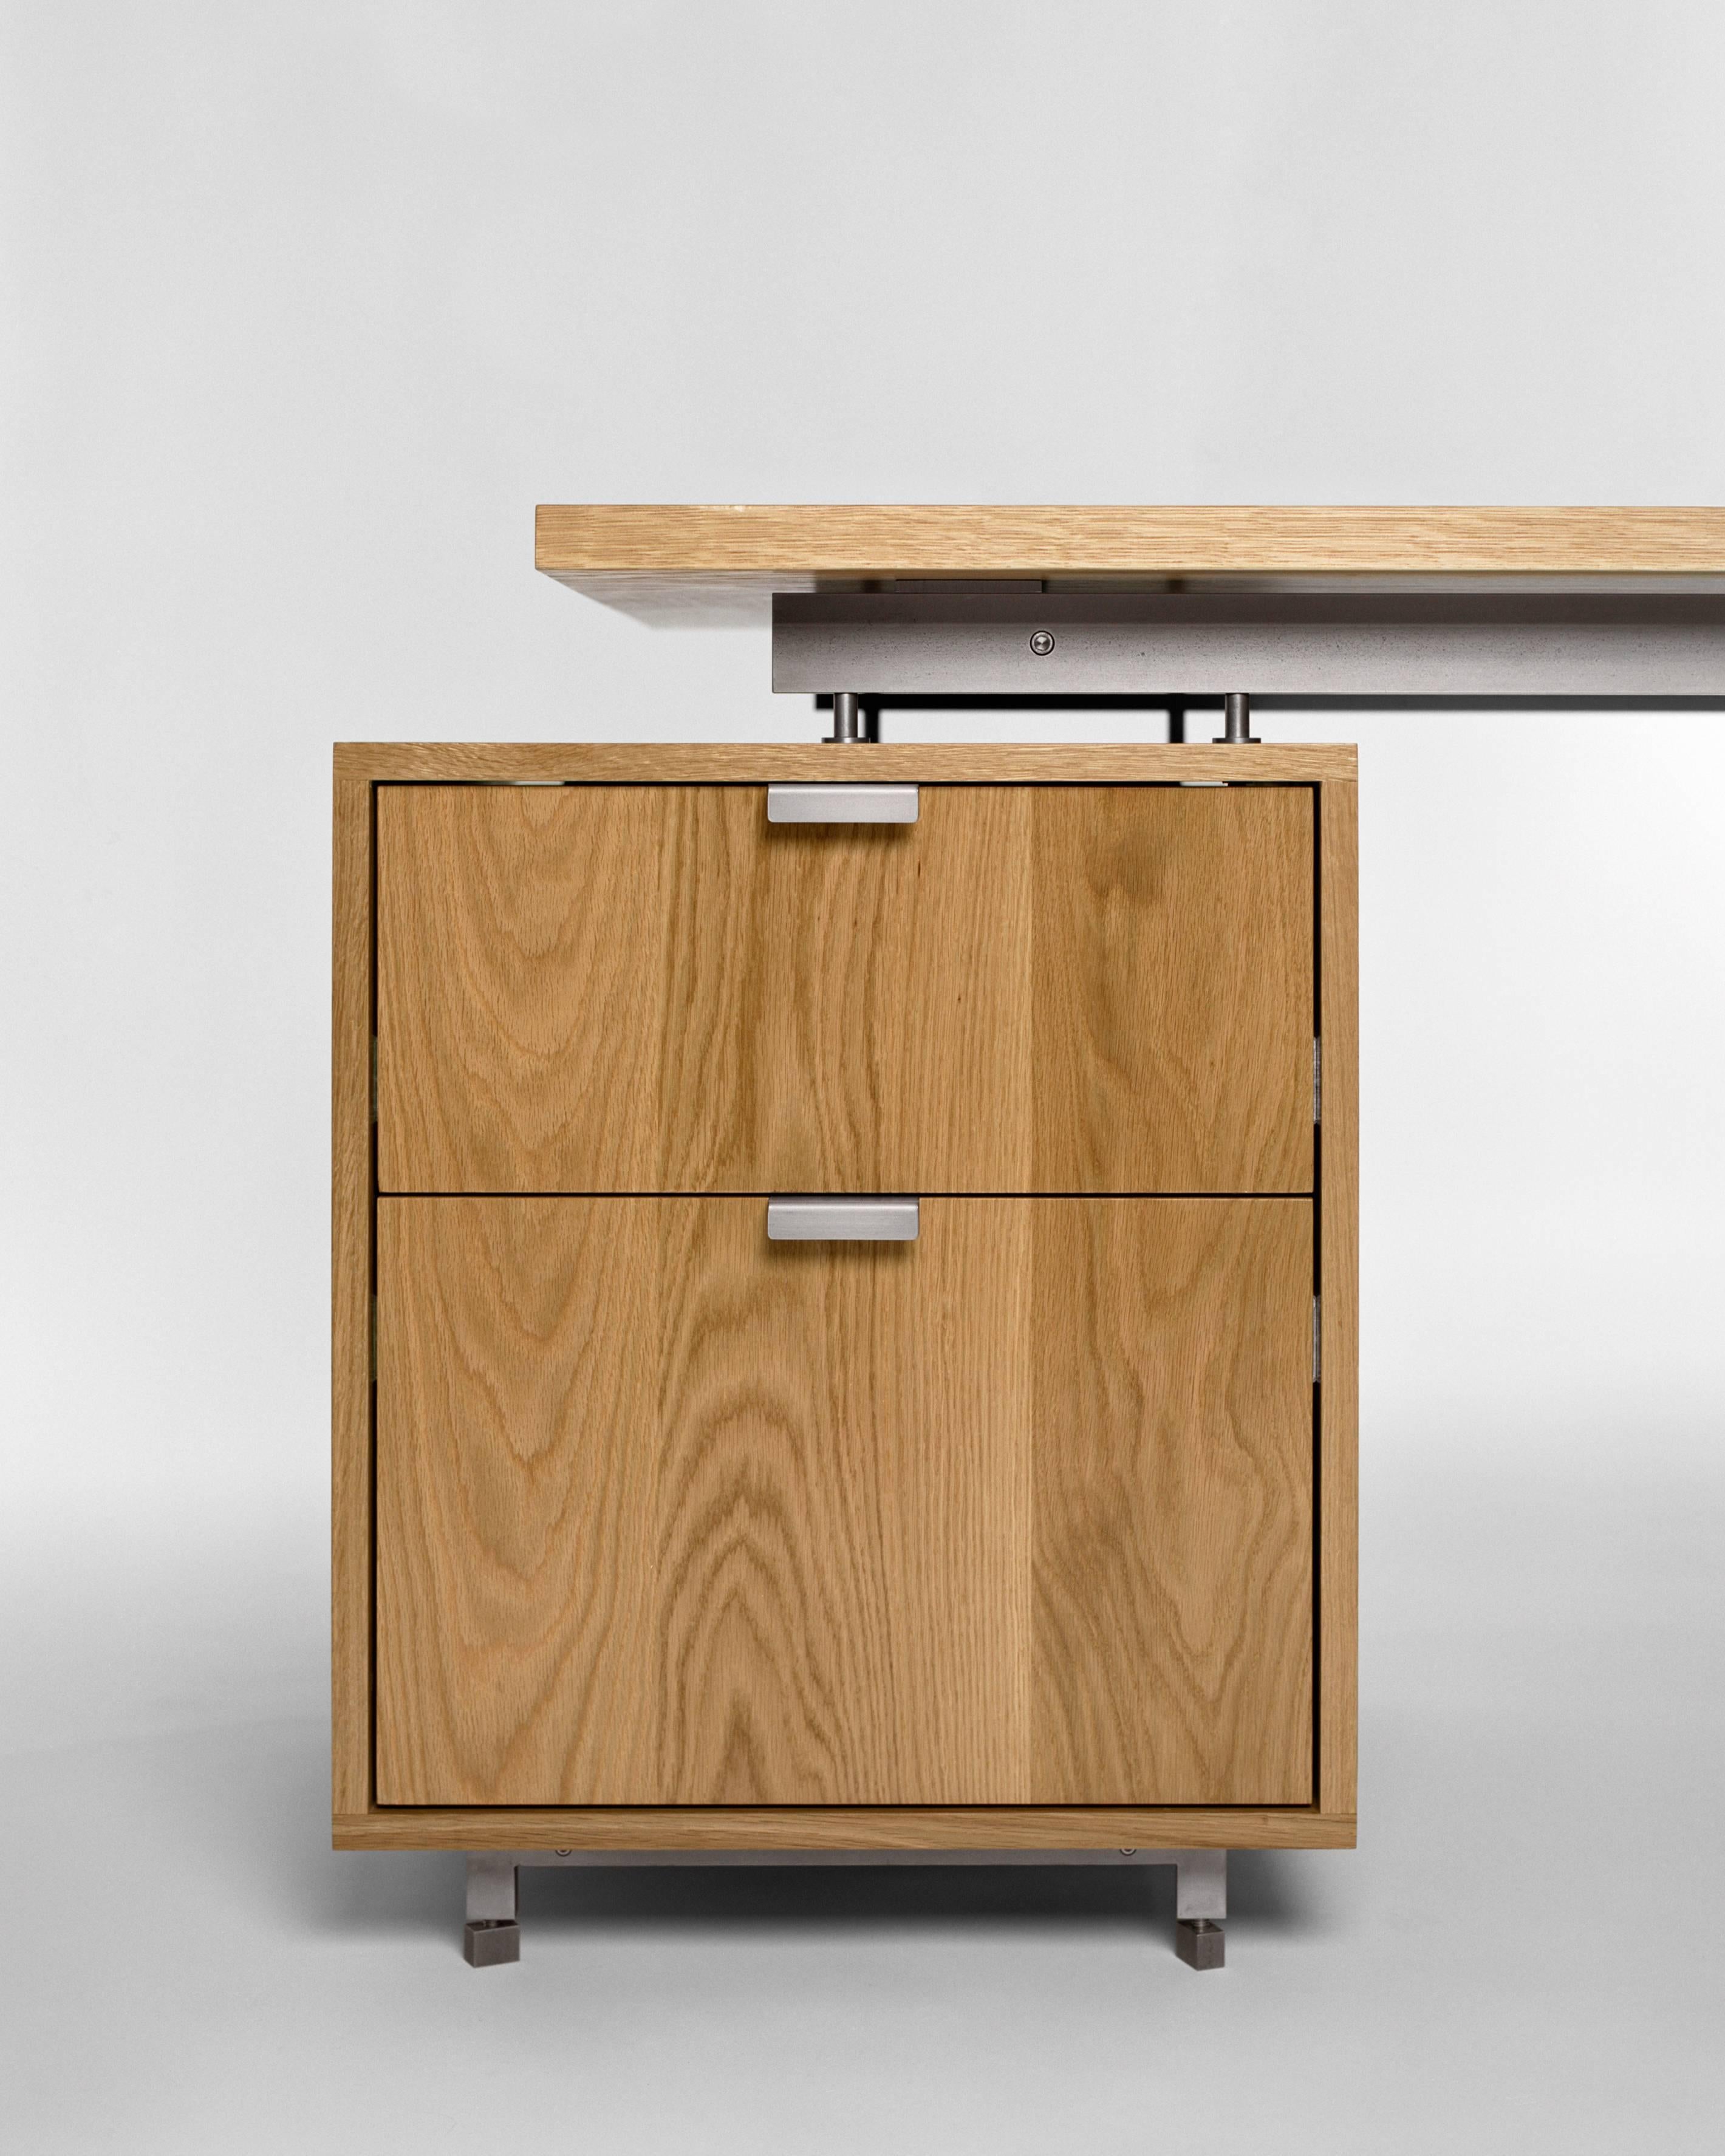 Elegant, comfortable and confident. The AD6 is handcrafted of dovetail-joined solid hardwood and cold-rolled steel bar; a study in the basic elements of composition: line, plane and volume. Includes one file and one storage drawer. 

Shown in solid